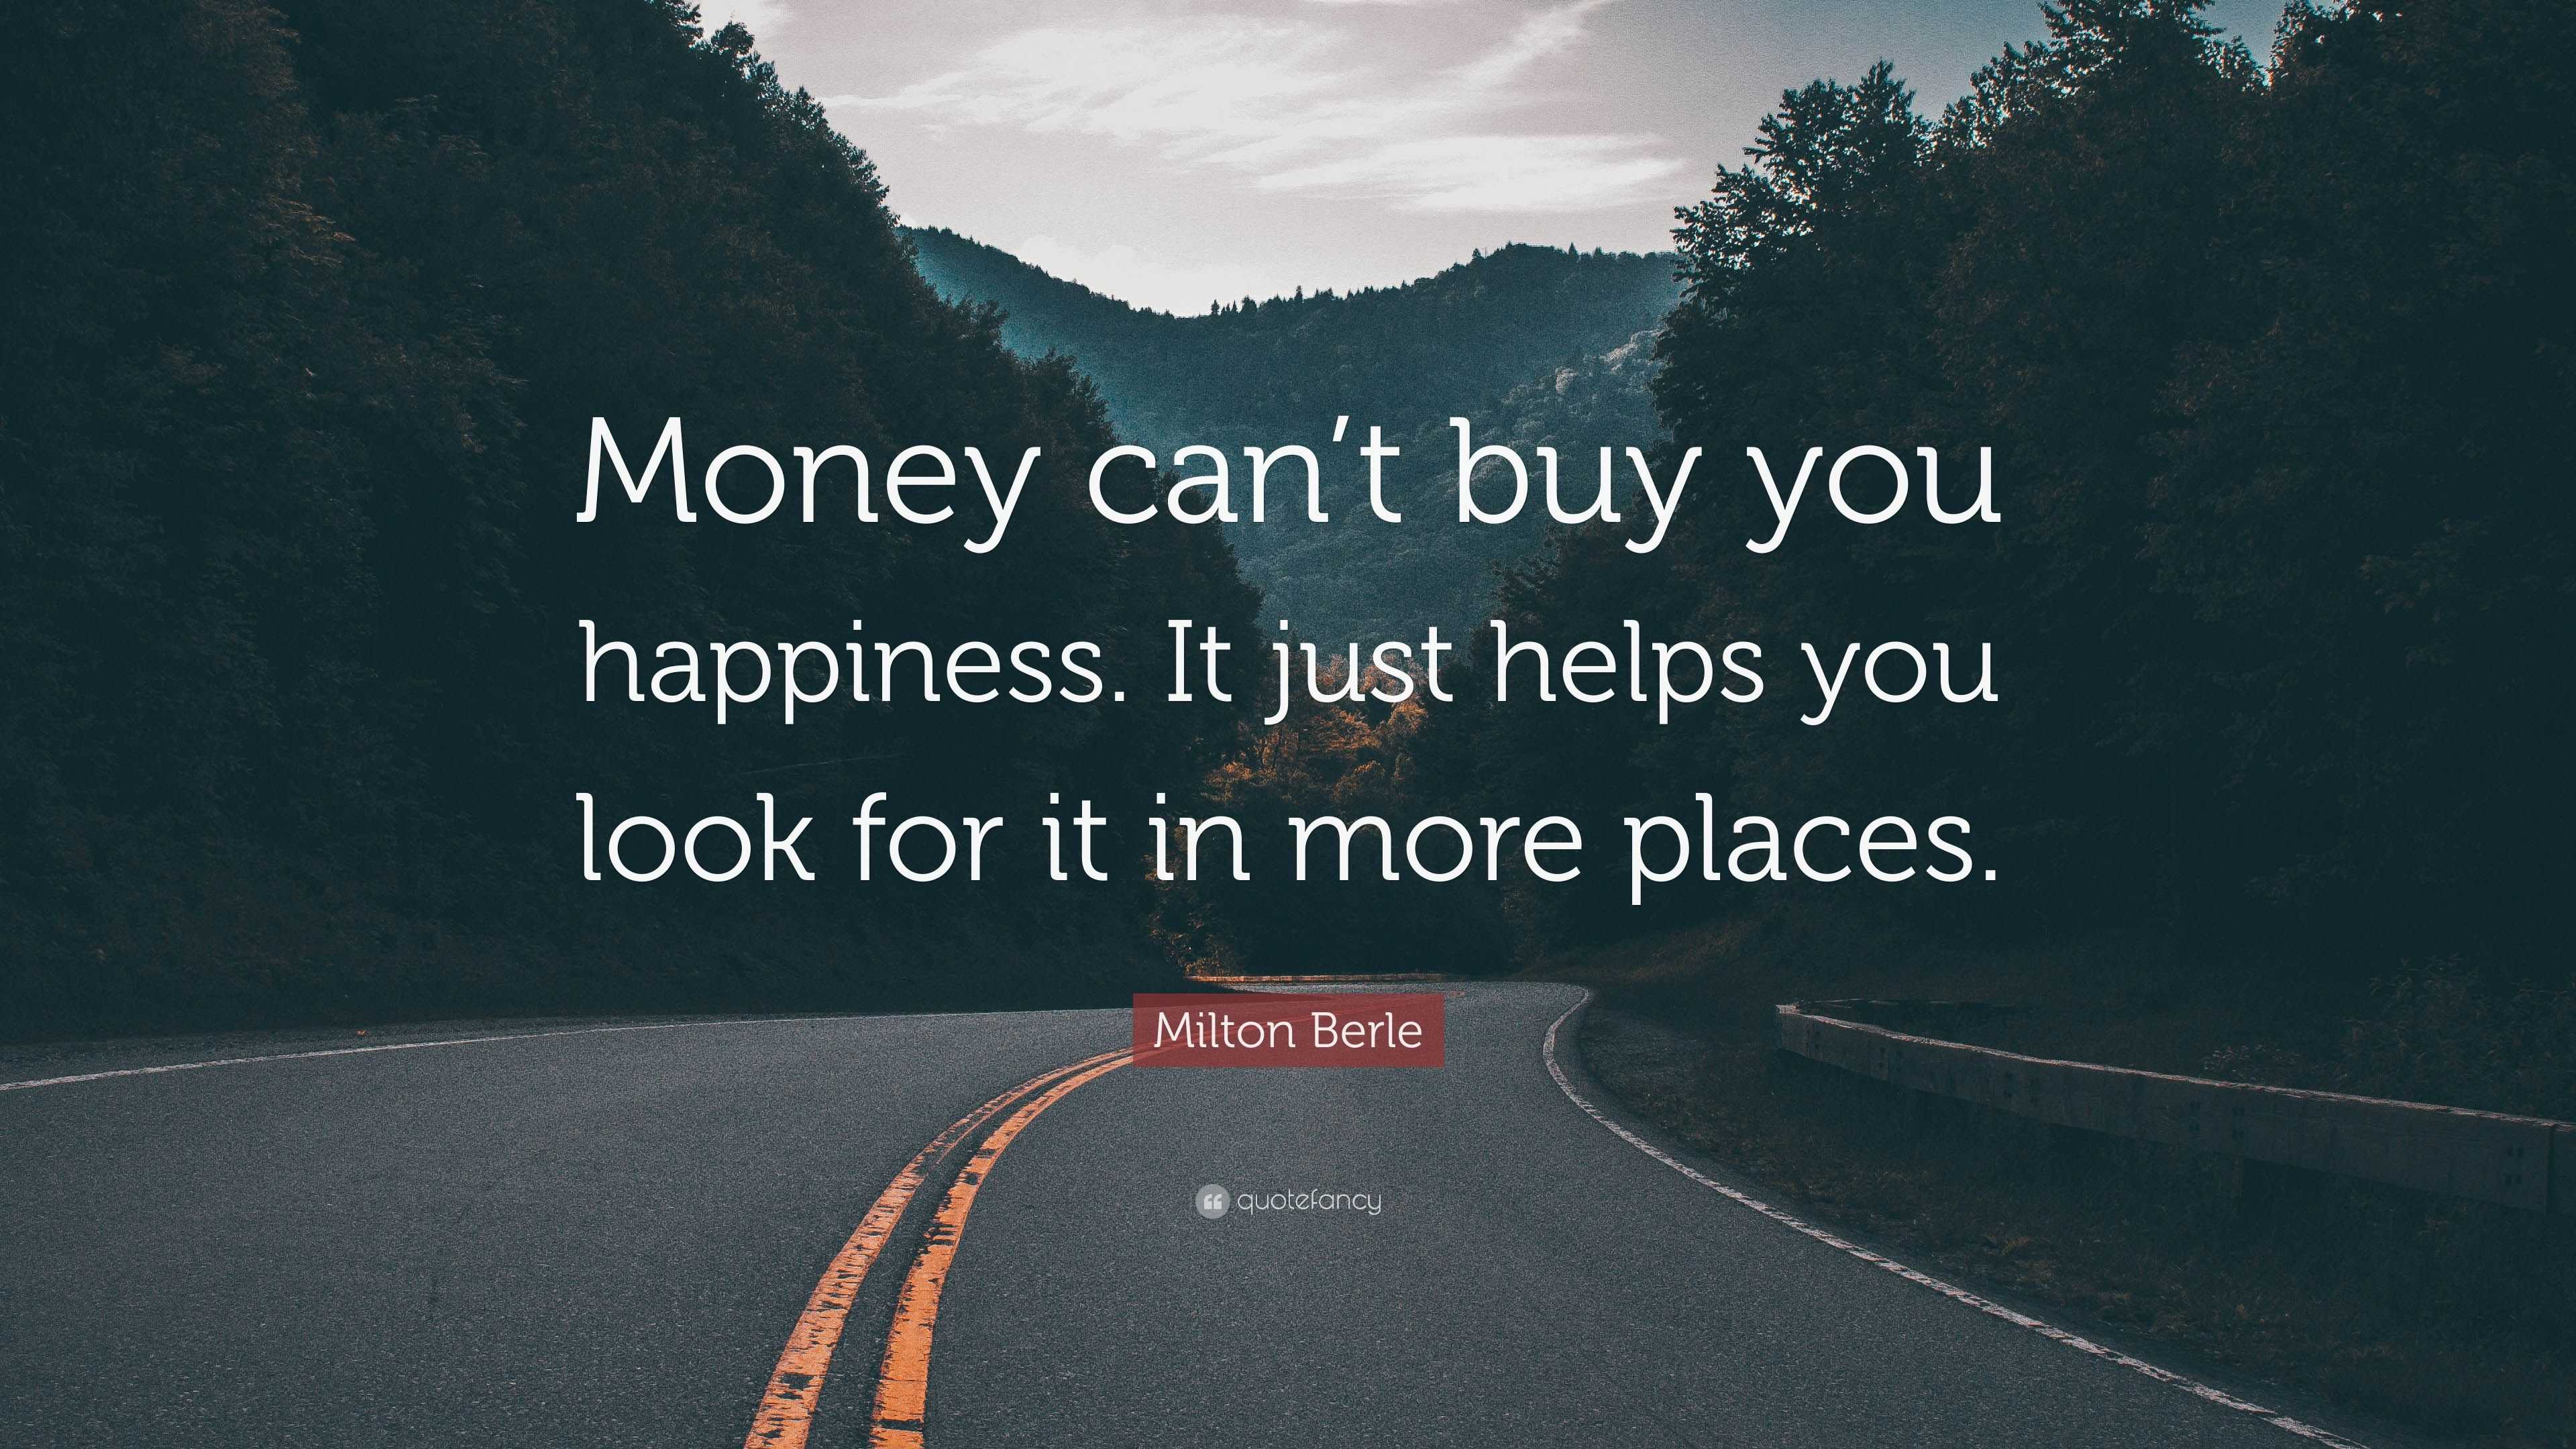 Milton Berle Quote “Money can’t buy you happiness. It just helps you